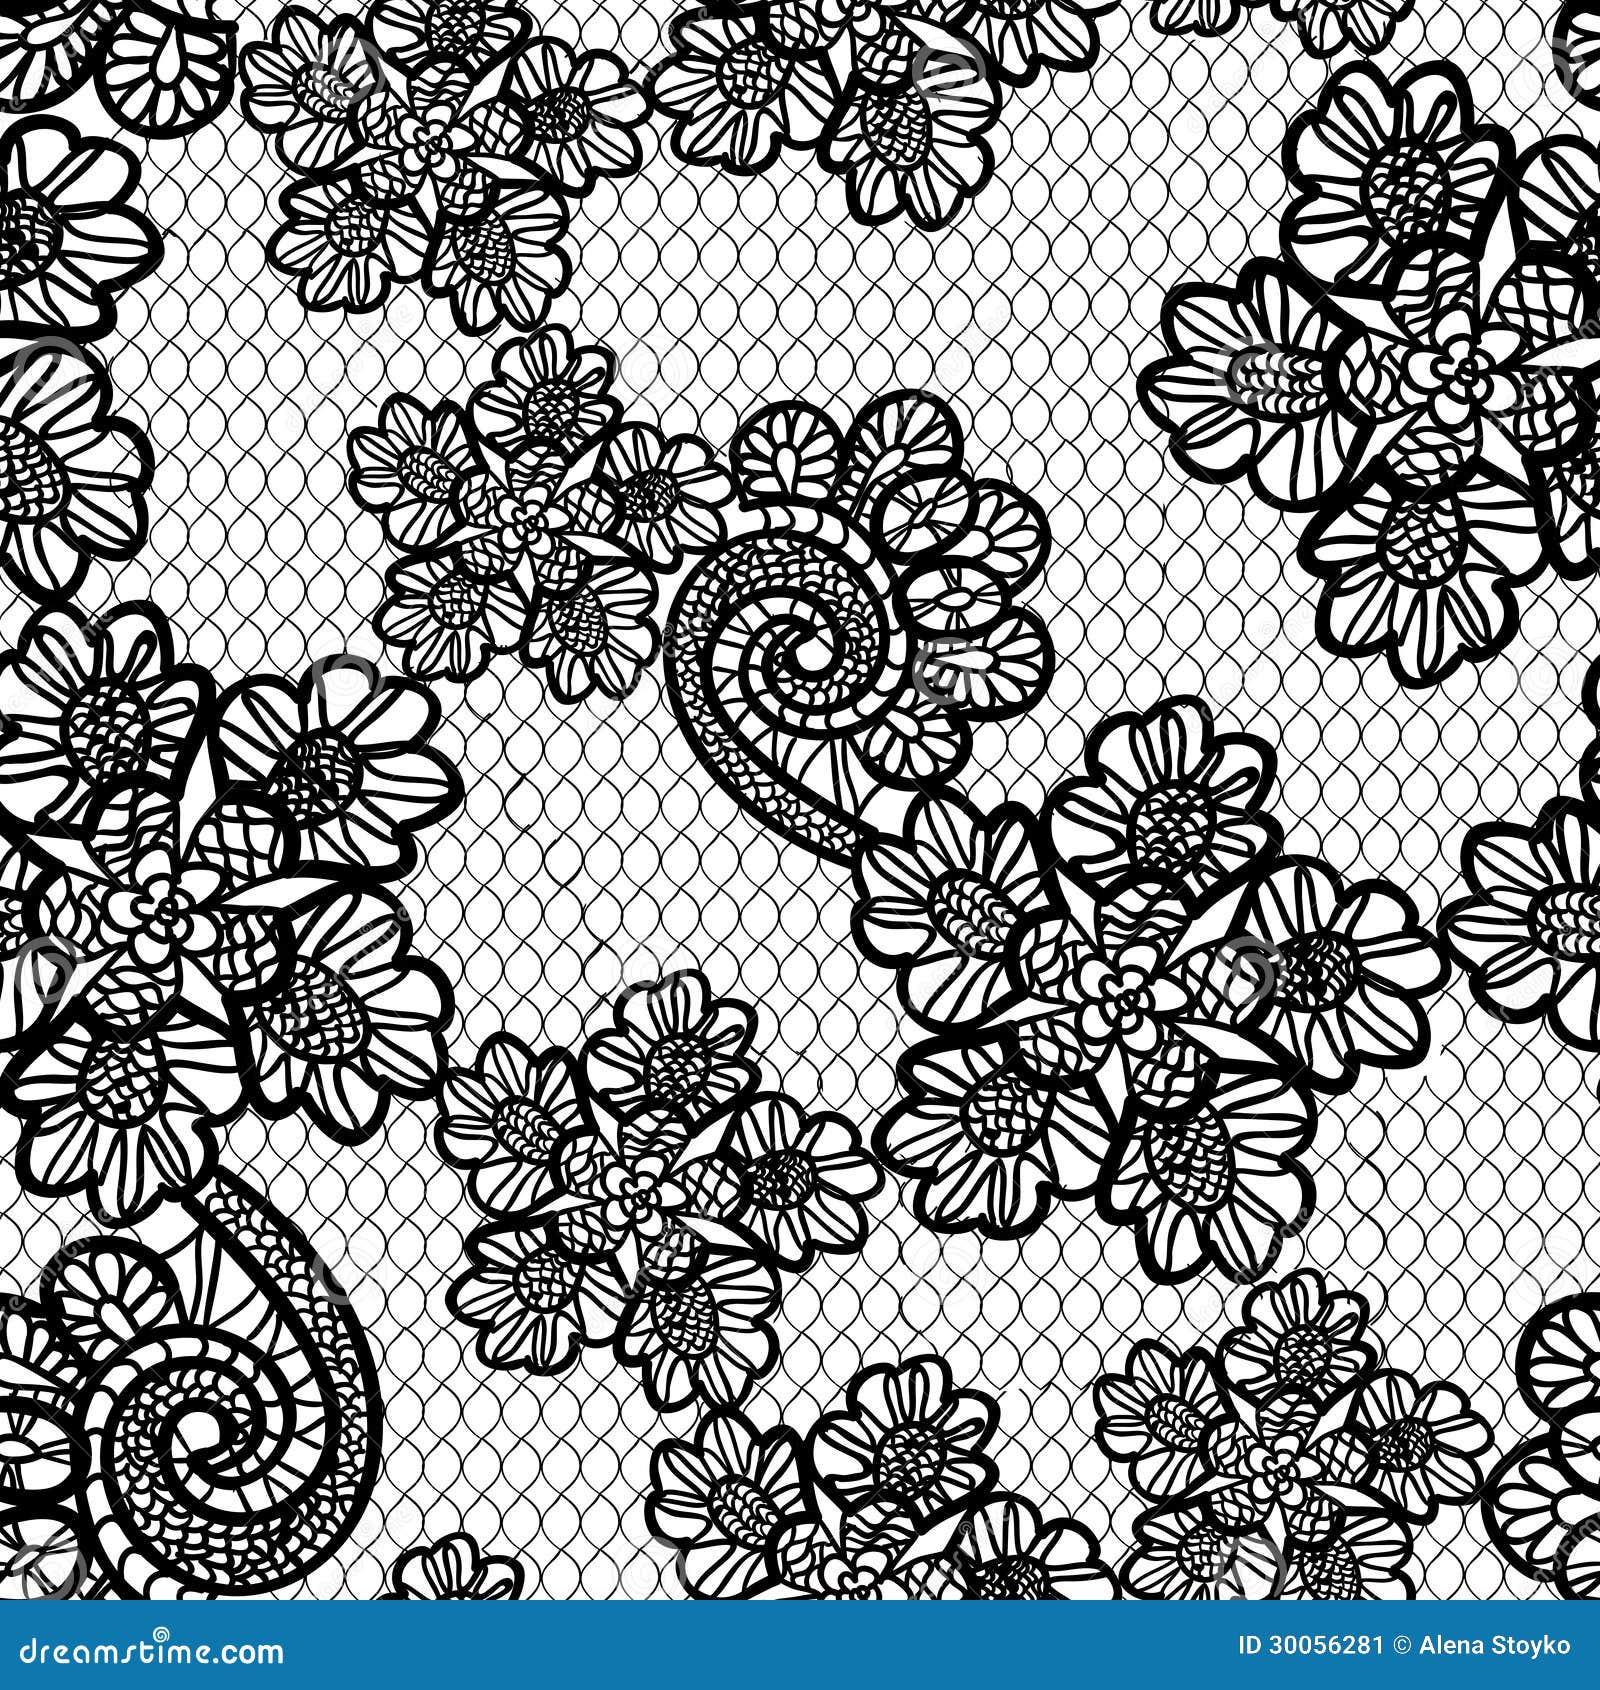 Seamless lace pattern stock vector. Illustration of design - 30056281